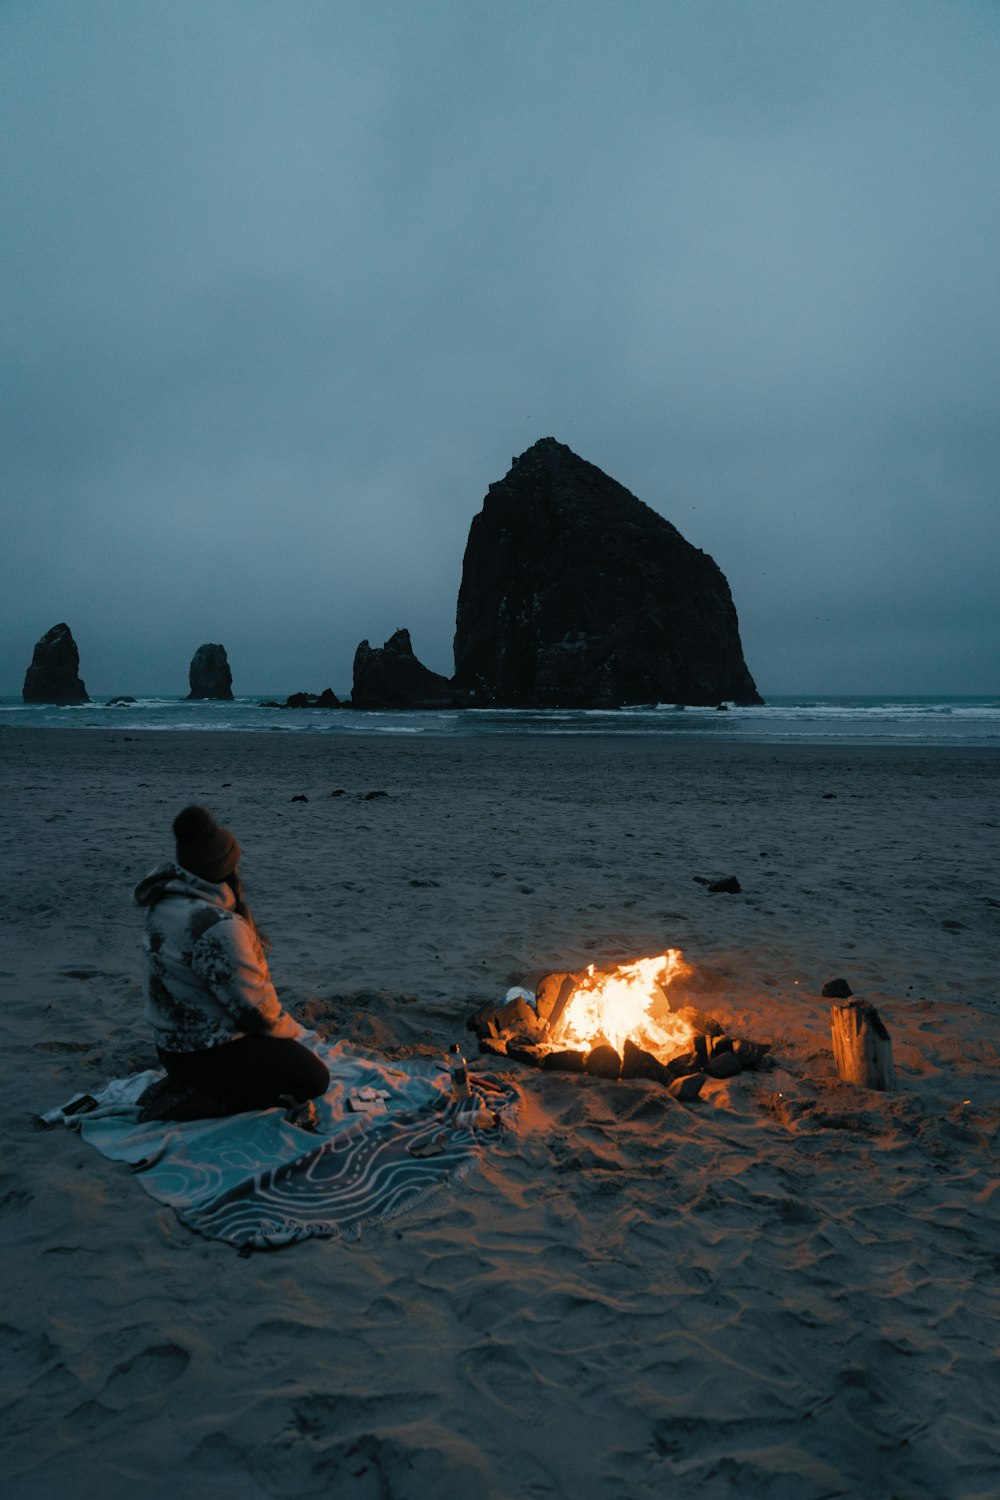 a person sitting next to a campfire on a beach